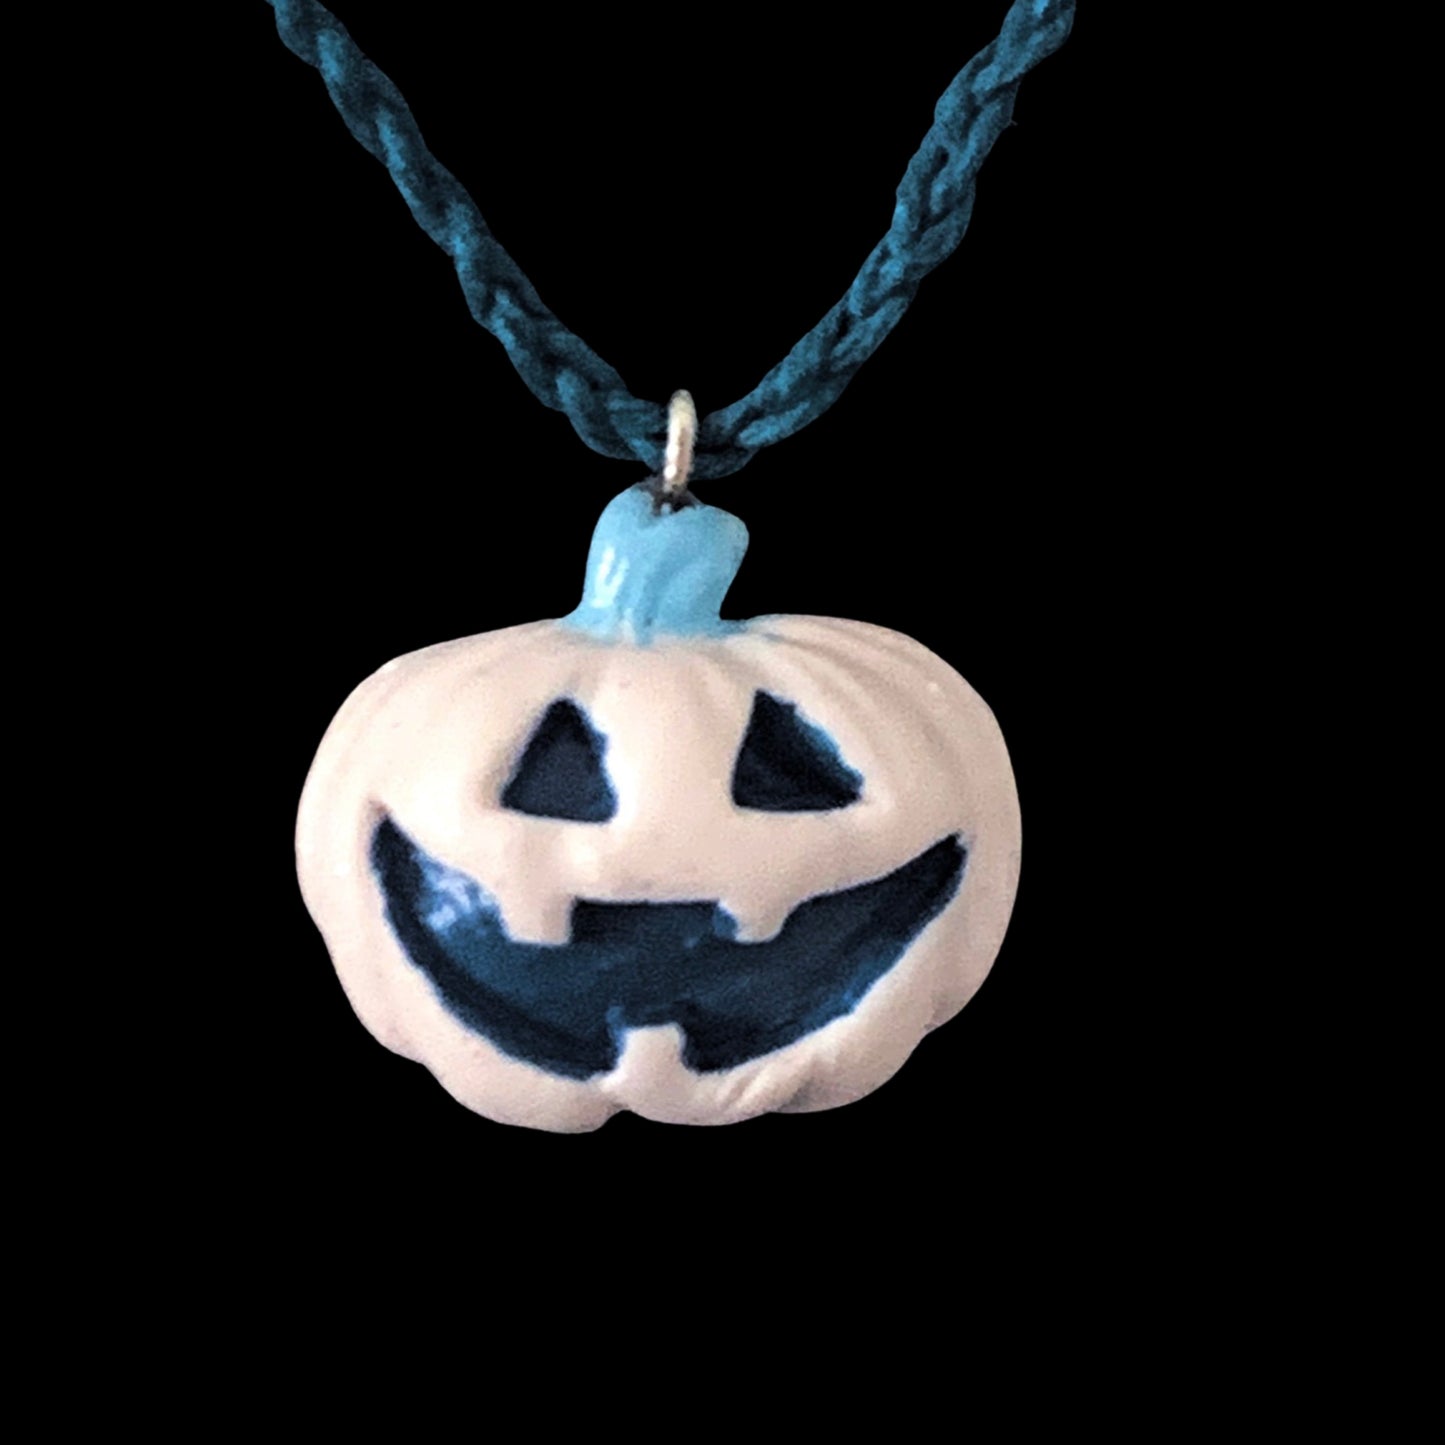 Frosted Winter Jack-O-Lantern Necklace, White Pumpkin, Blue Cotton Cord